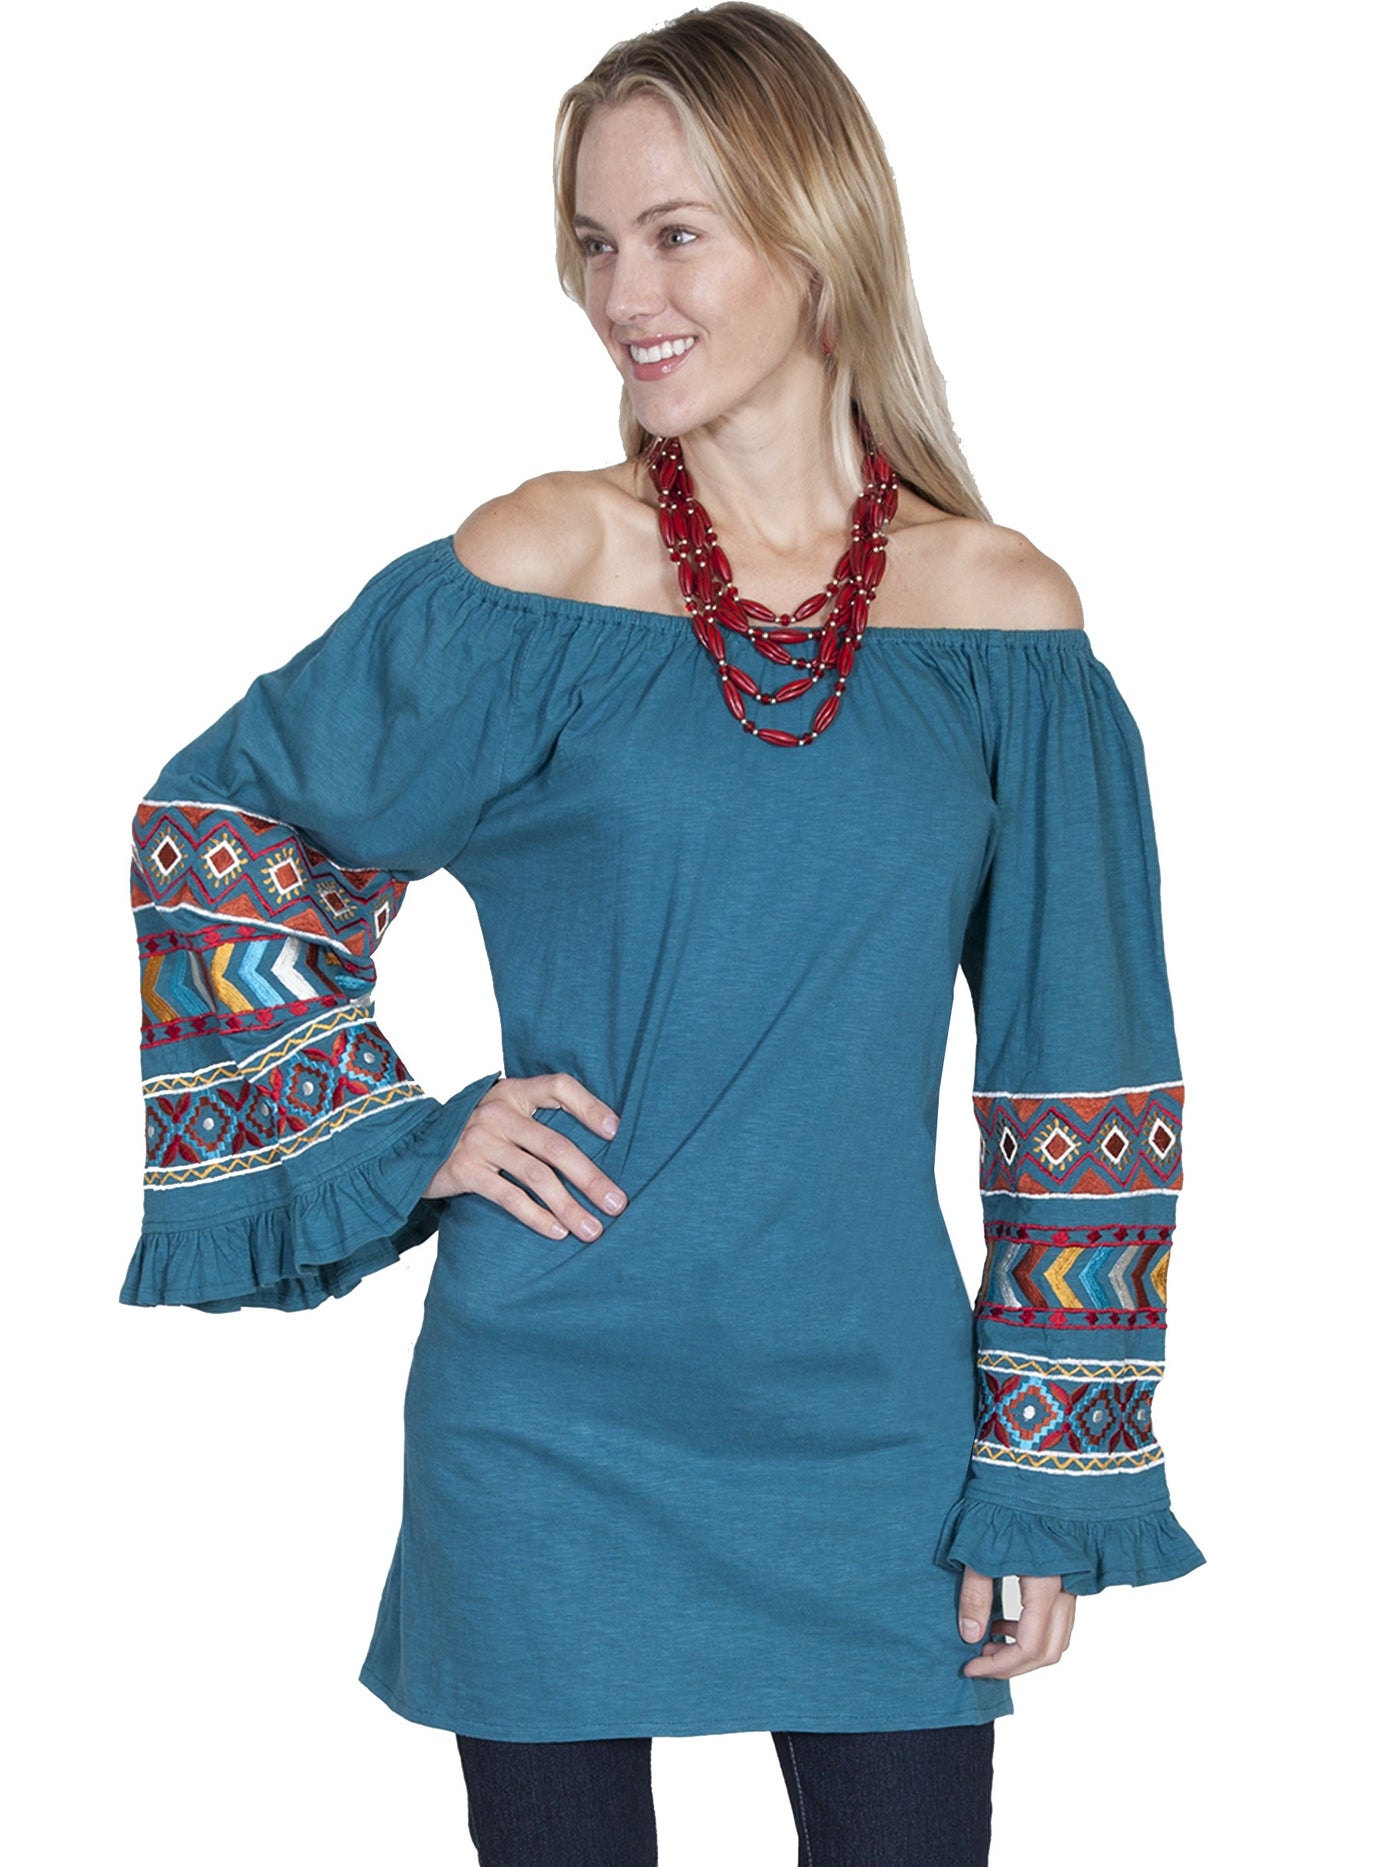 Boho Style Off Shoulder Tunic in Teal - SOLD OUT